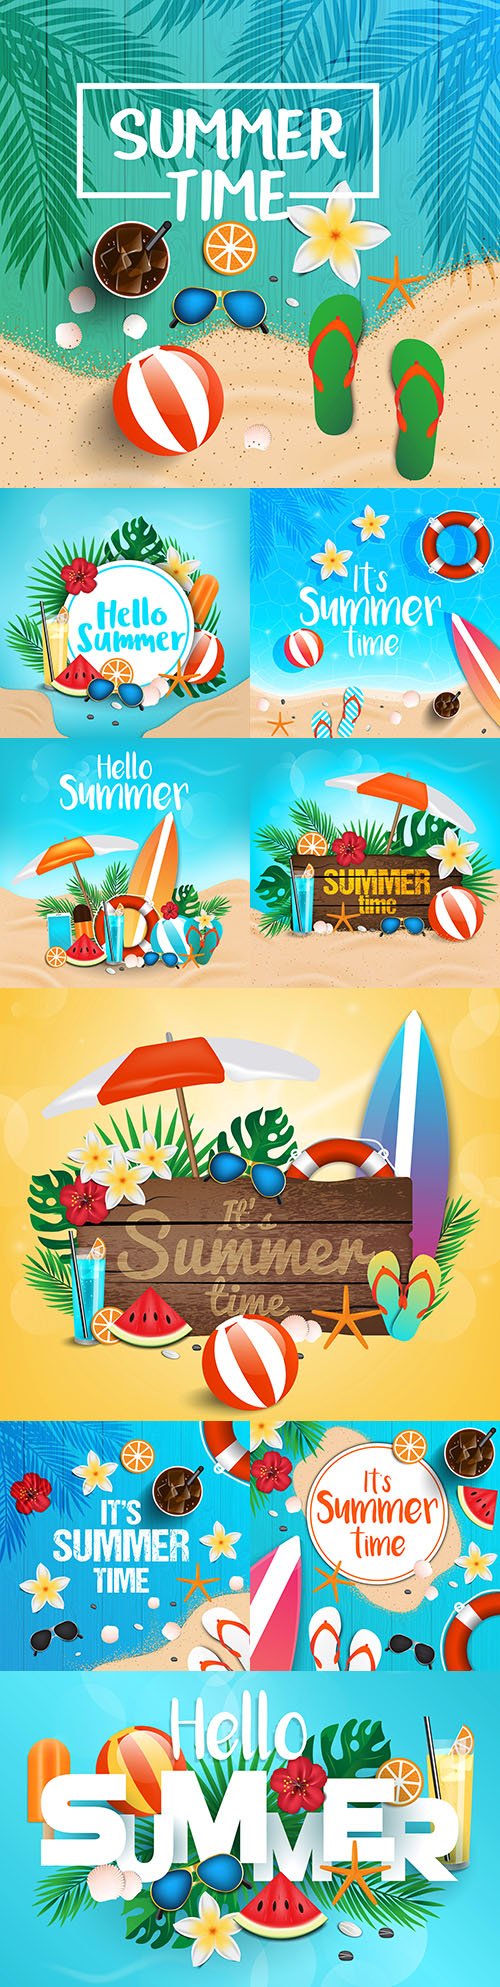 Hello summer holidays tropical background